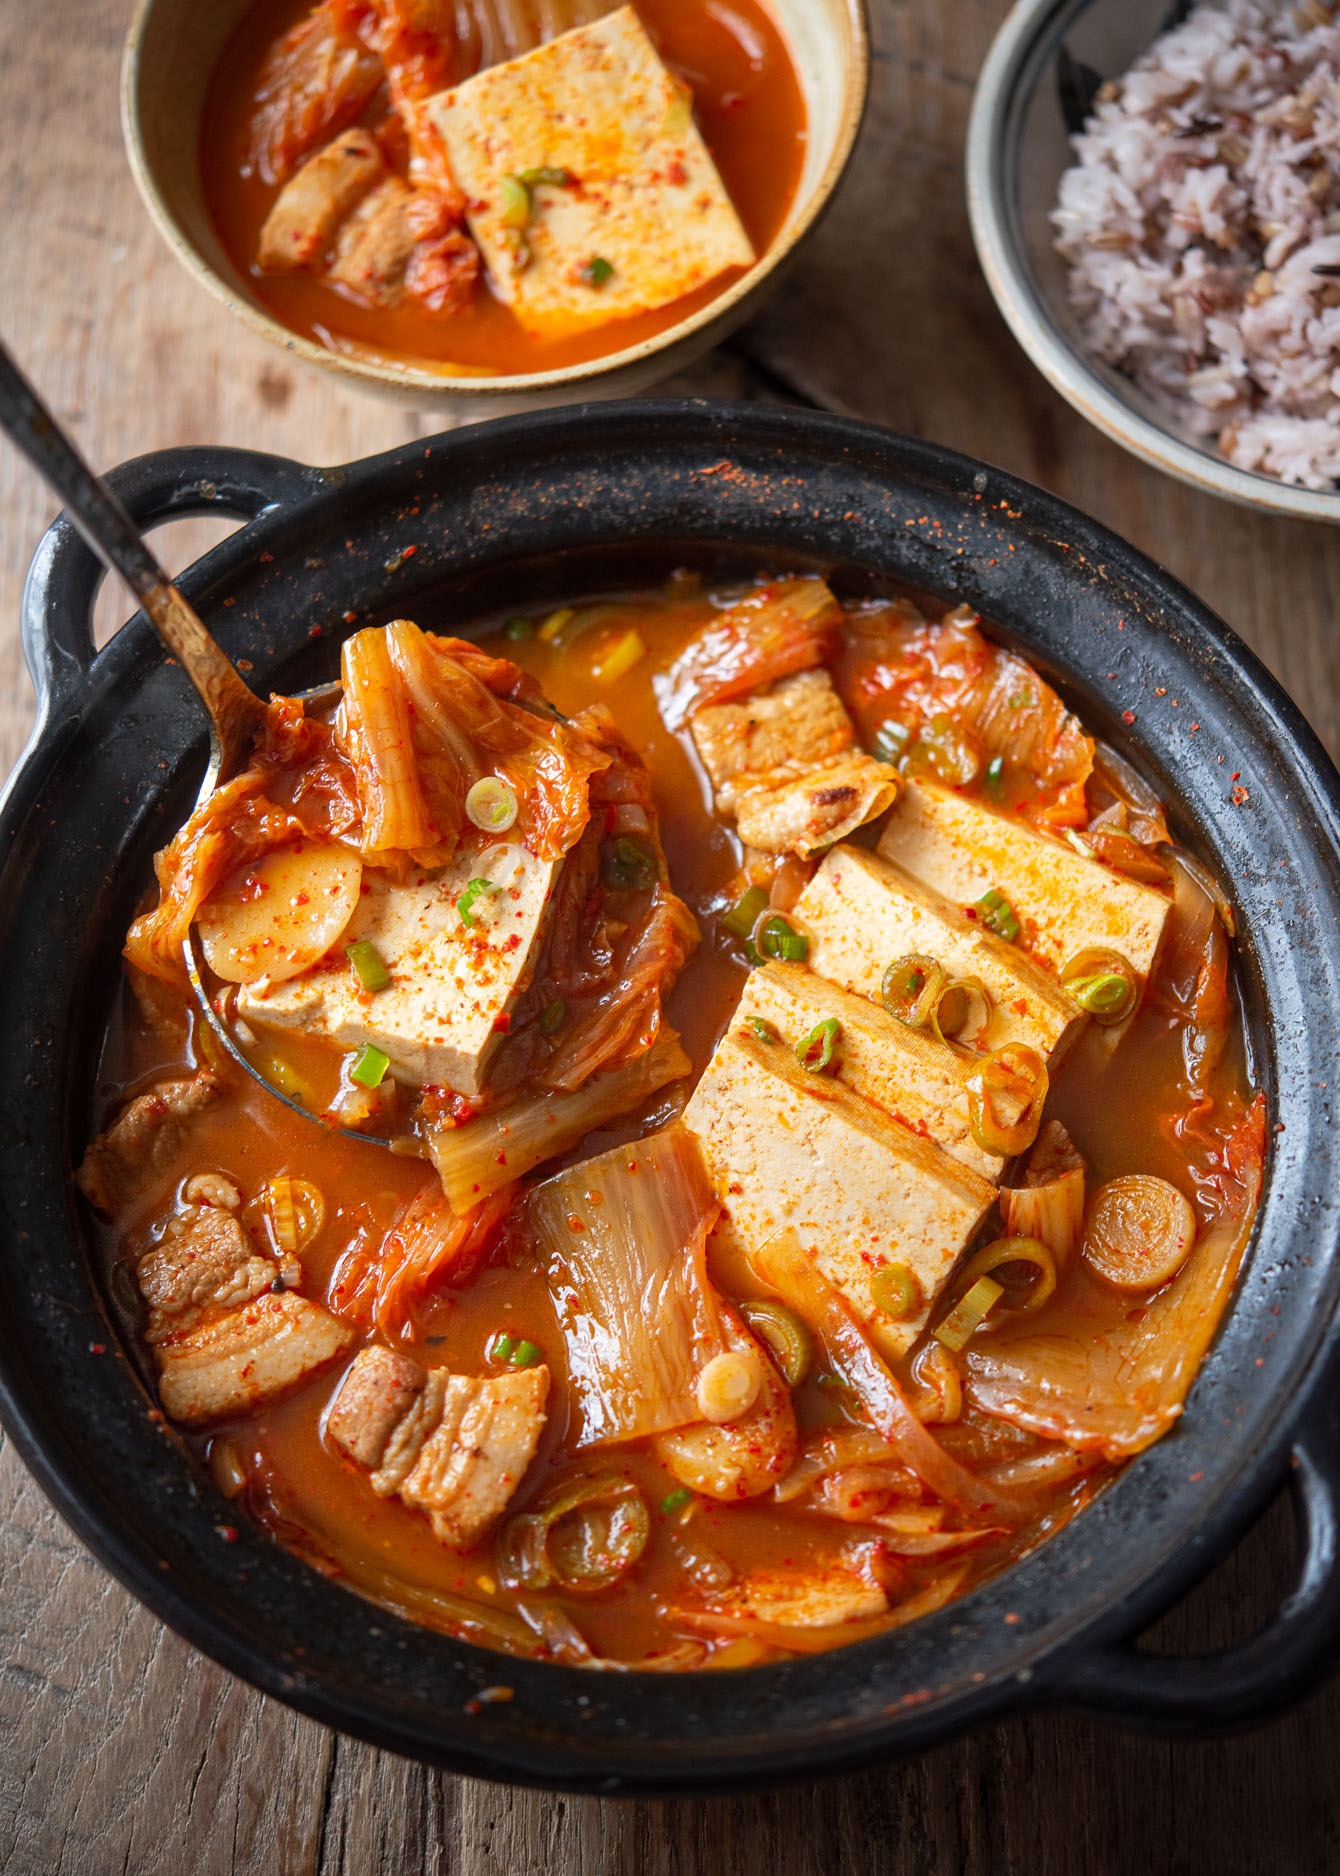 A ladle of kimchi stew (kimchi jjigae) with tofu and pork from the pot.